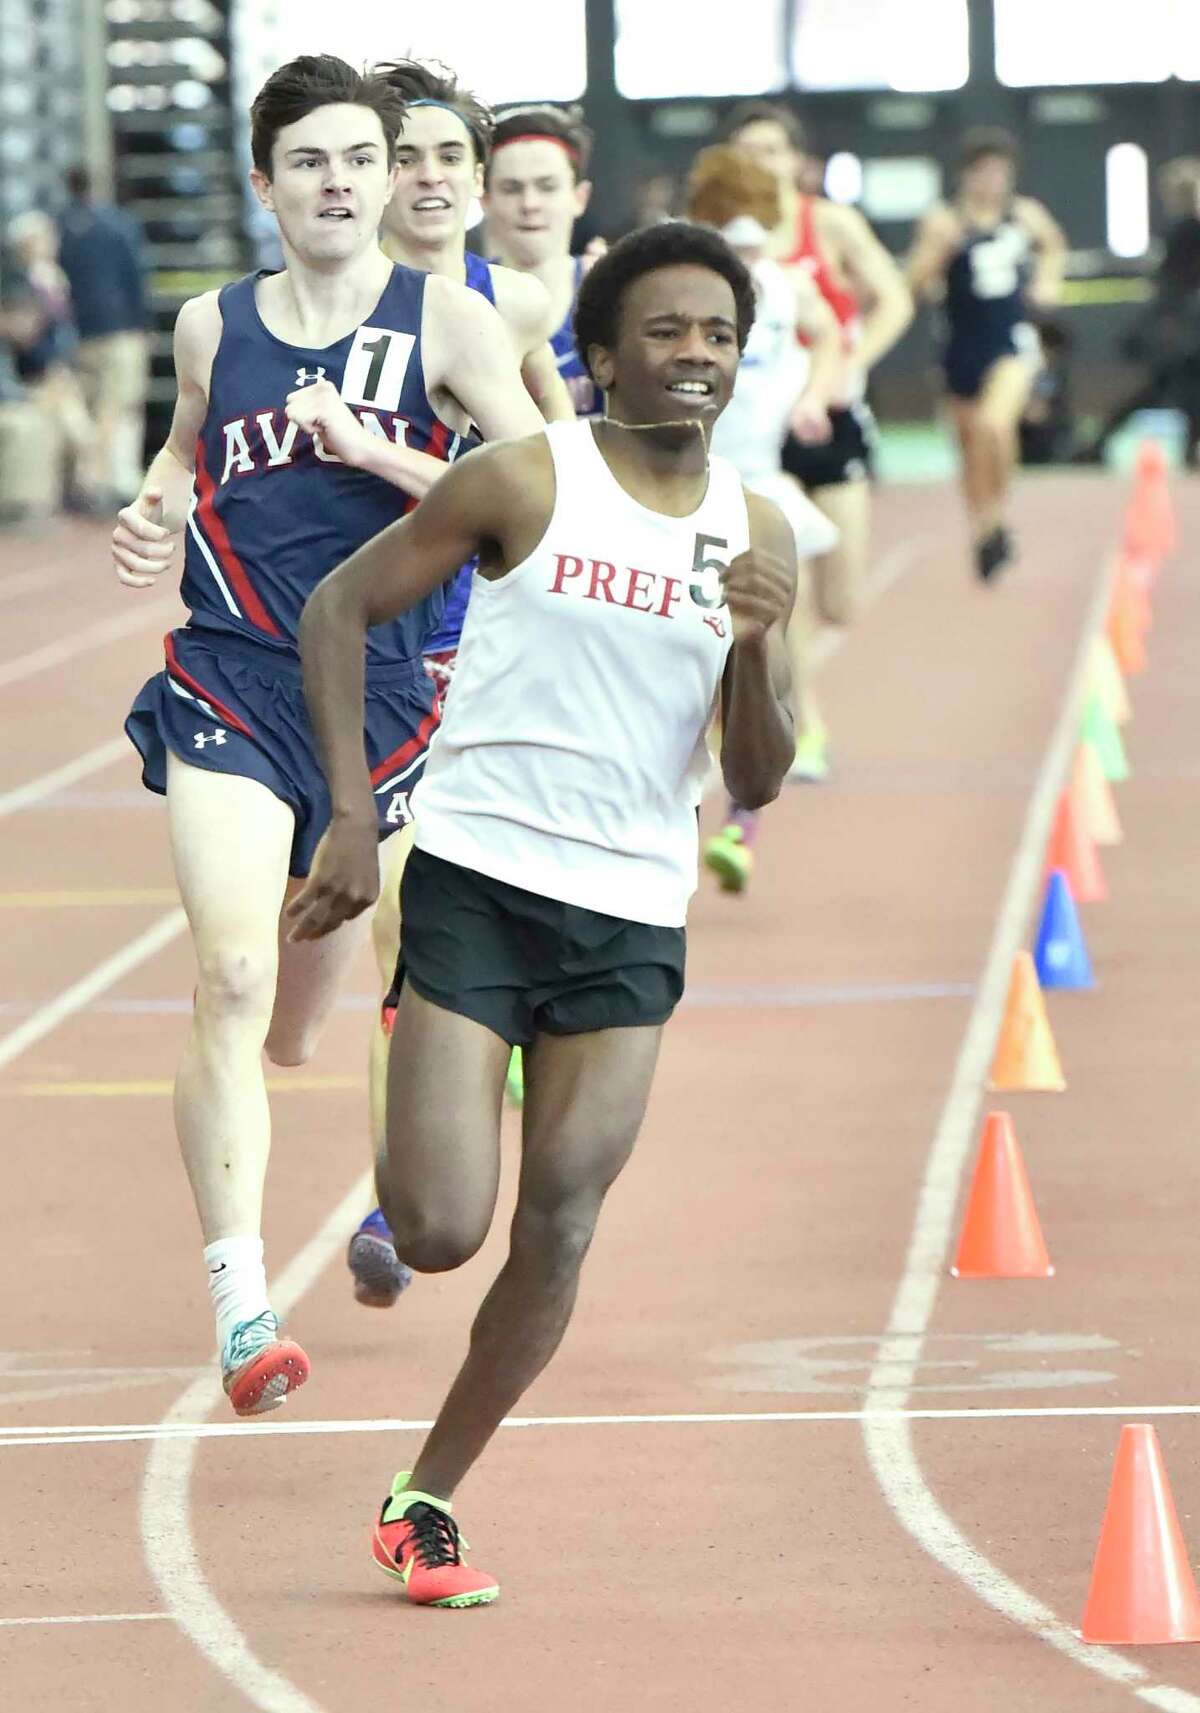 New Haven Connecticut - February 22, 2020: Third-place finisher Azaan Dawson of Fairfield Prep leads the pack early against eventual winner Jack Martin of Avon H.S., left, and third-place finisher Alec Sauter of Tolland H.S. during boys 1600-meter run at the CIAC State Open Indoor Track Championship Saturday at the Floyd Little Athletic Center in New Haven.